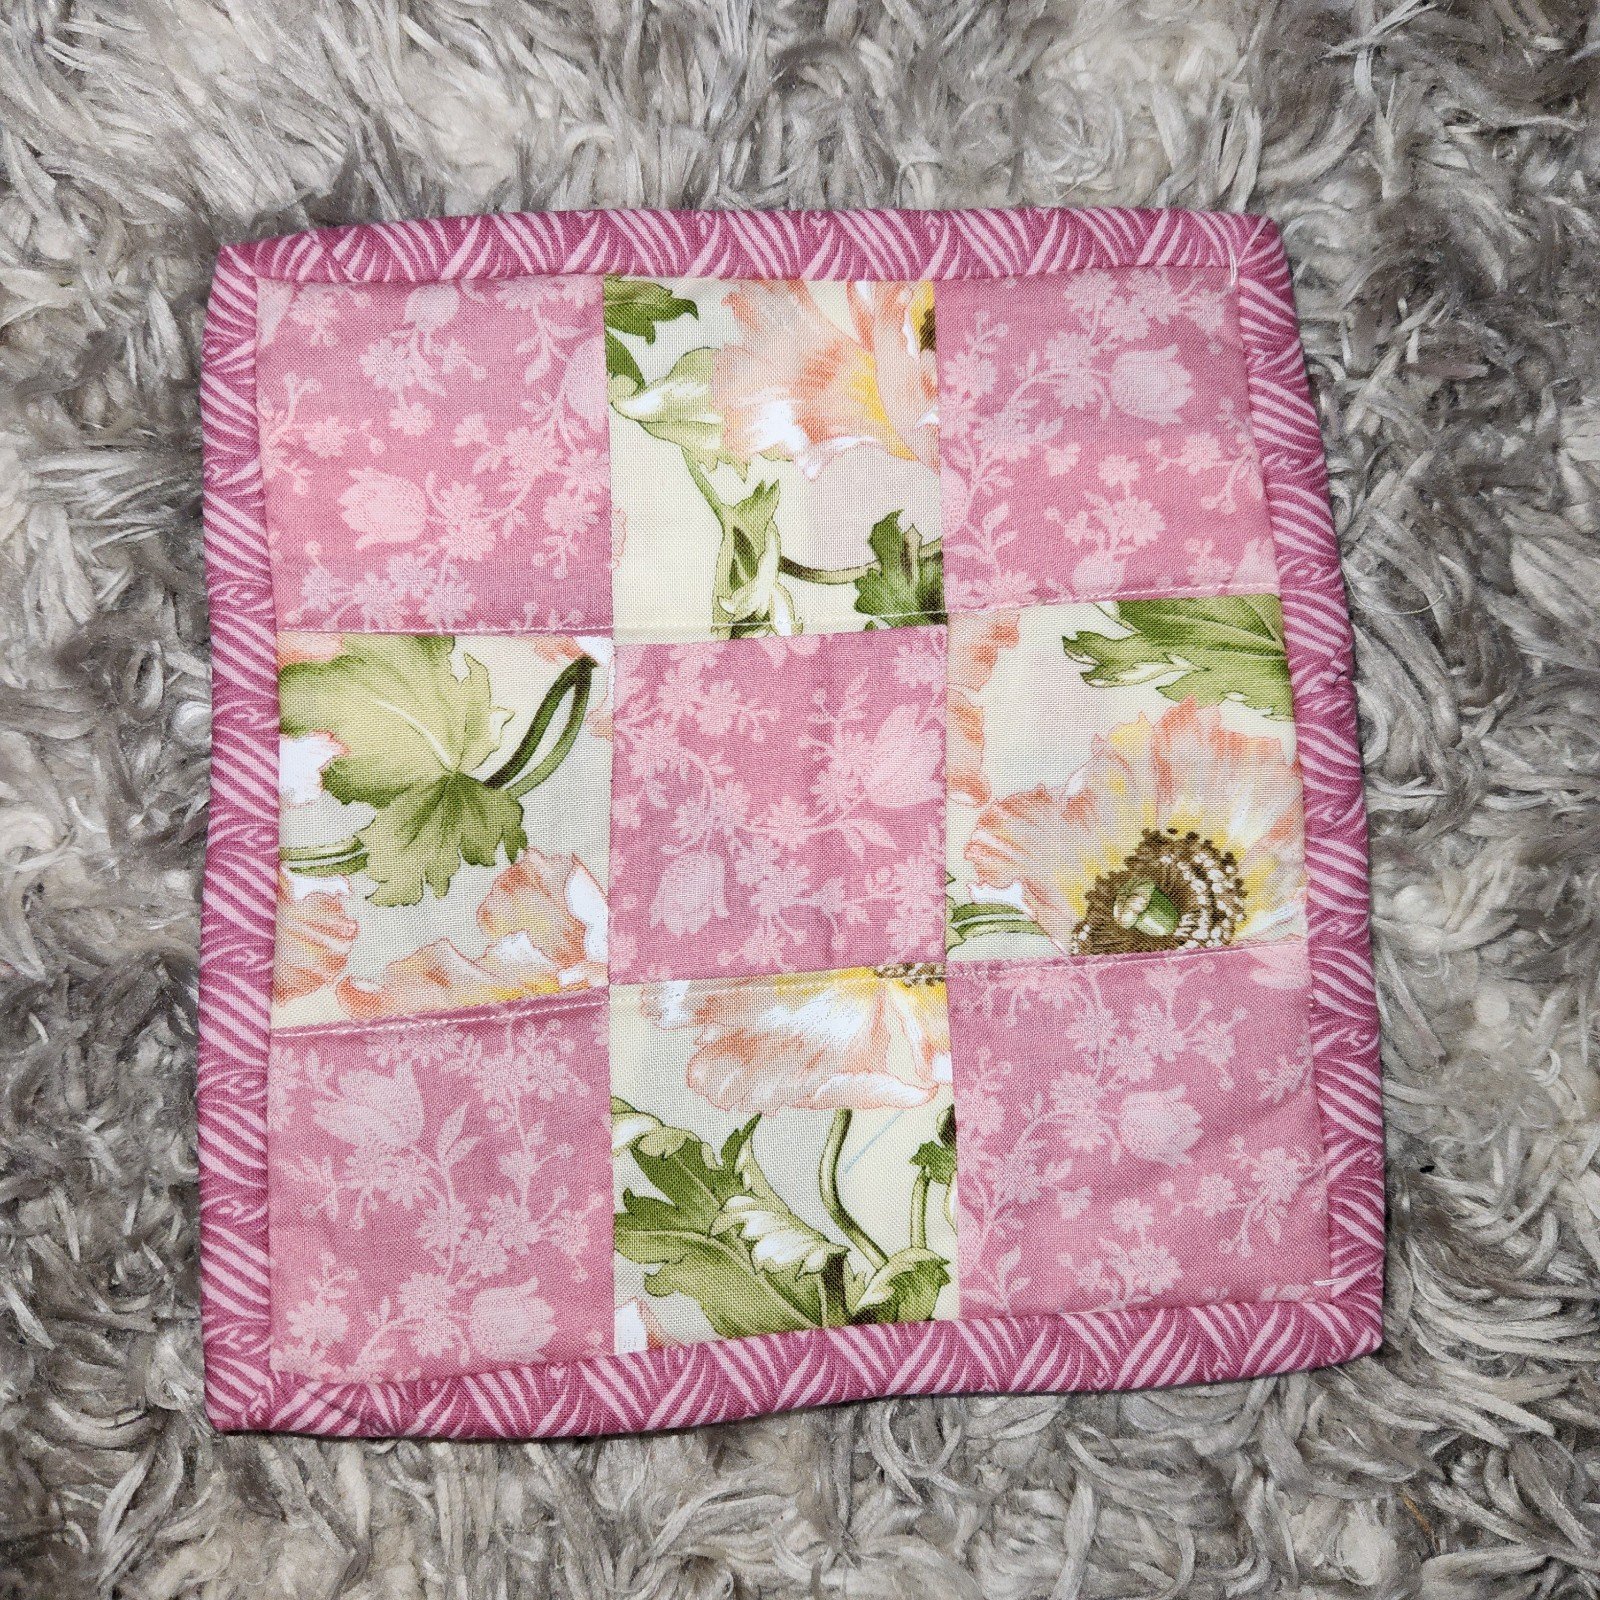 Quilted Patchwork Wall Hanging Floral 8x8 Inches 7N8LOGHNk